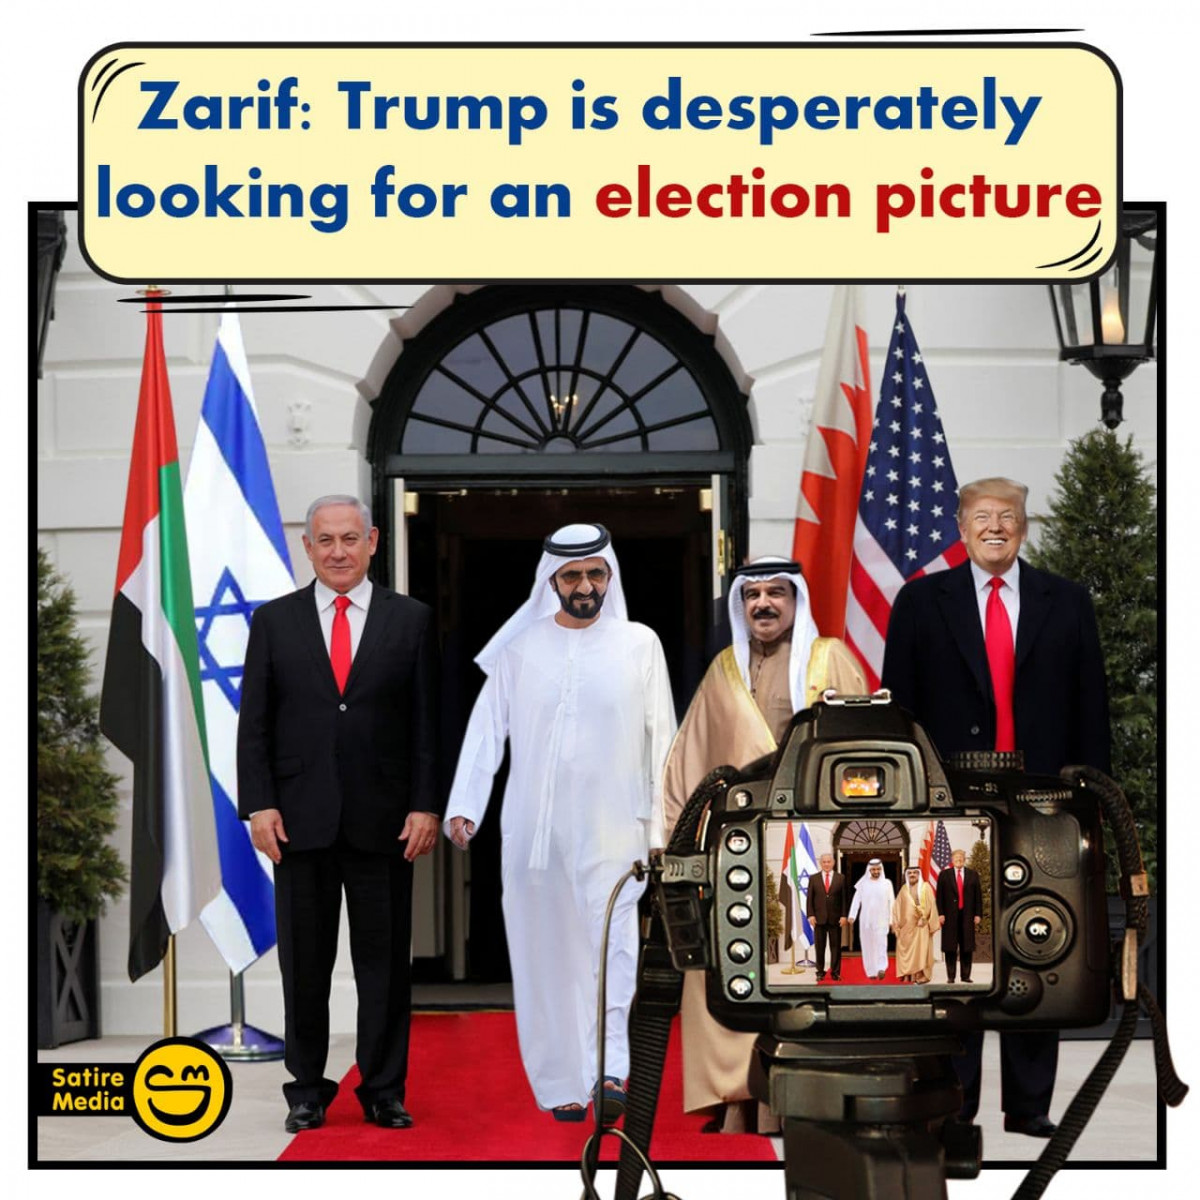 Zarif: Trump is desperately looking for an election picture